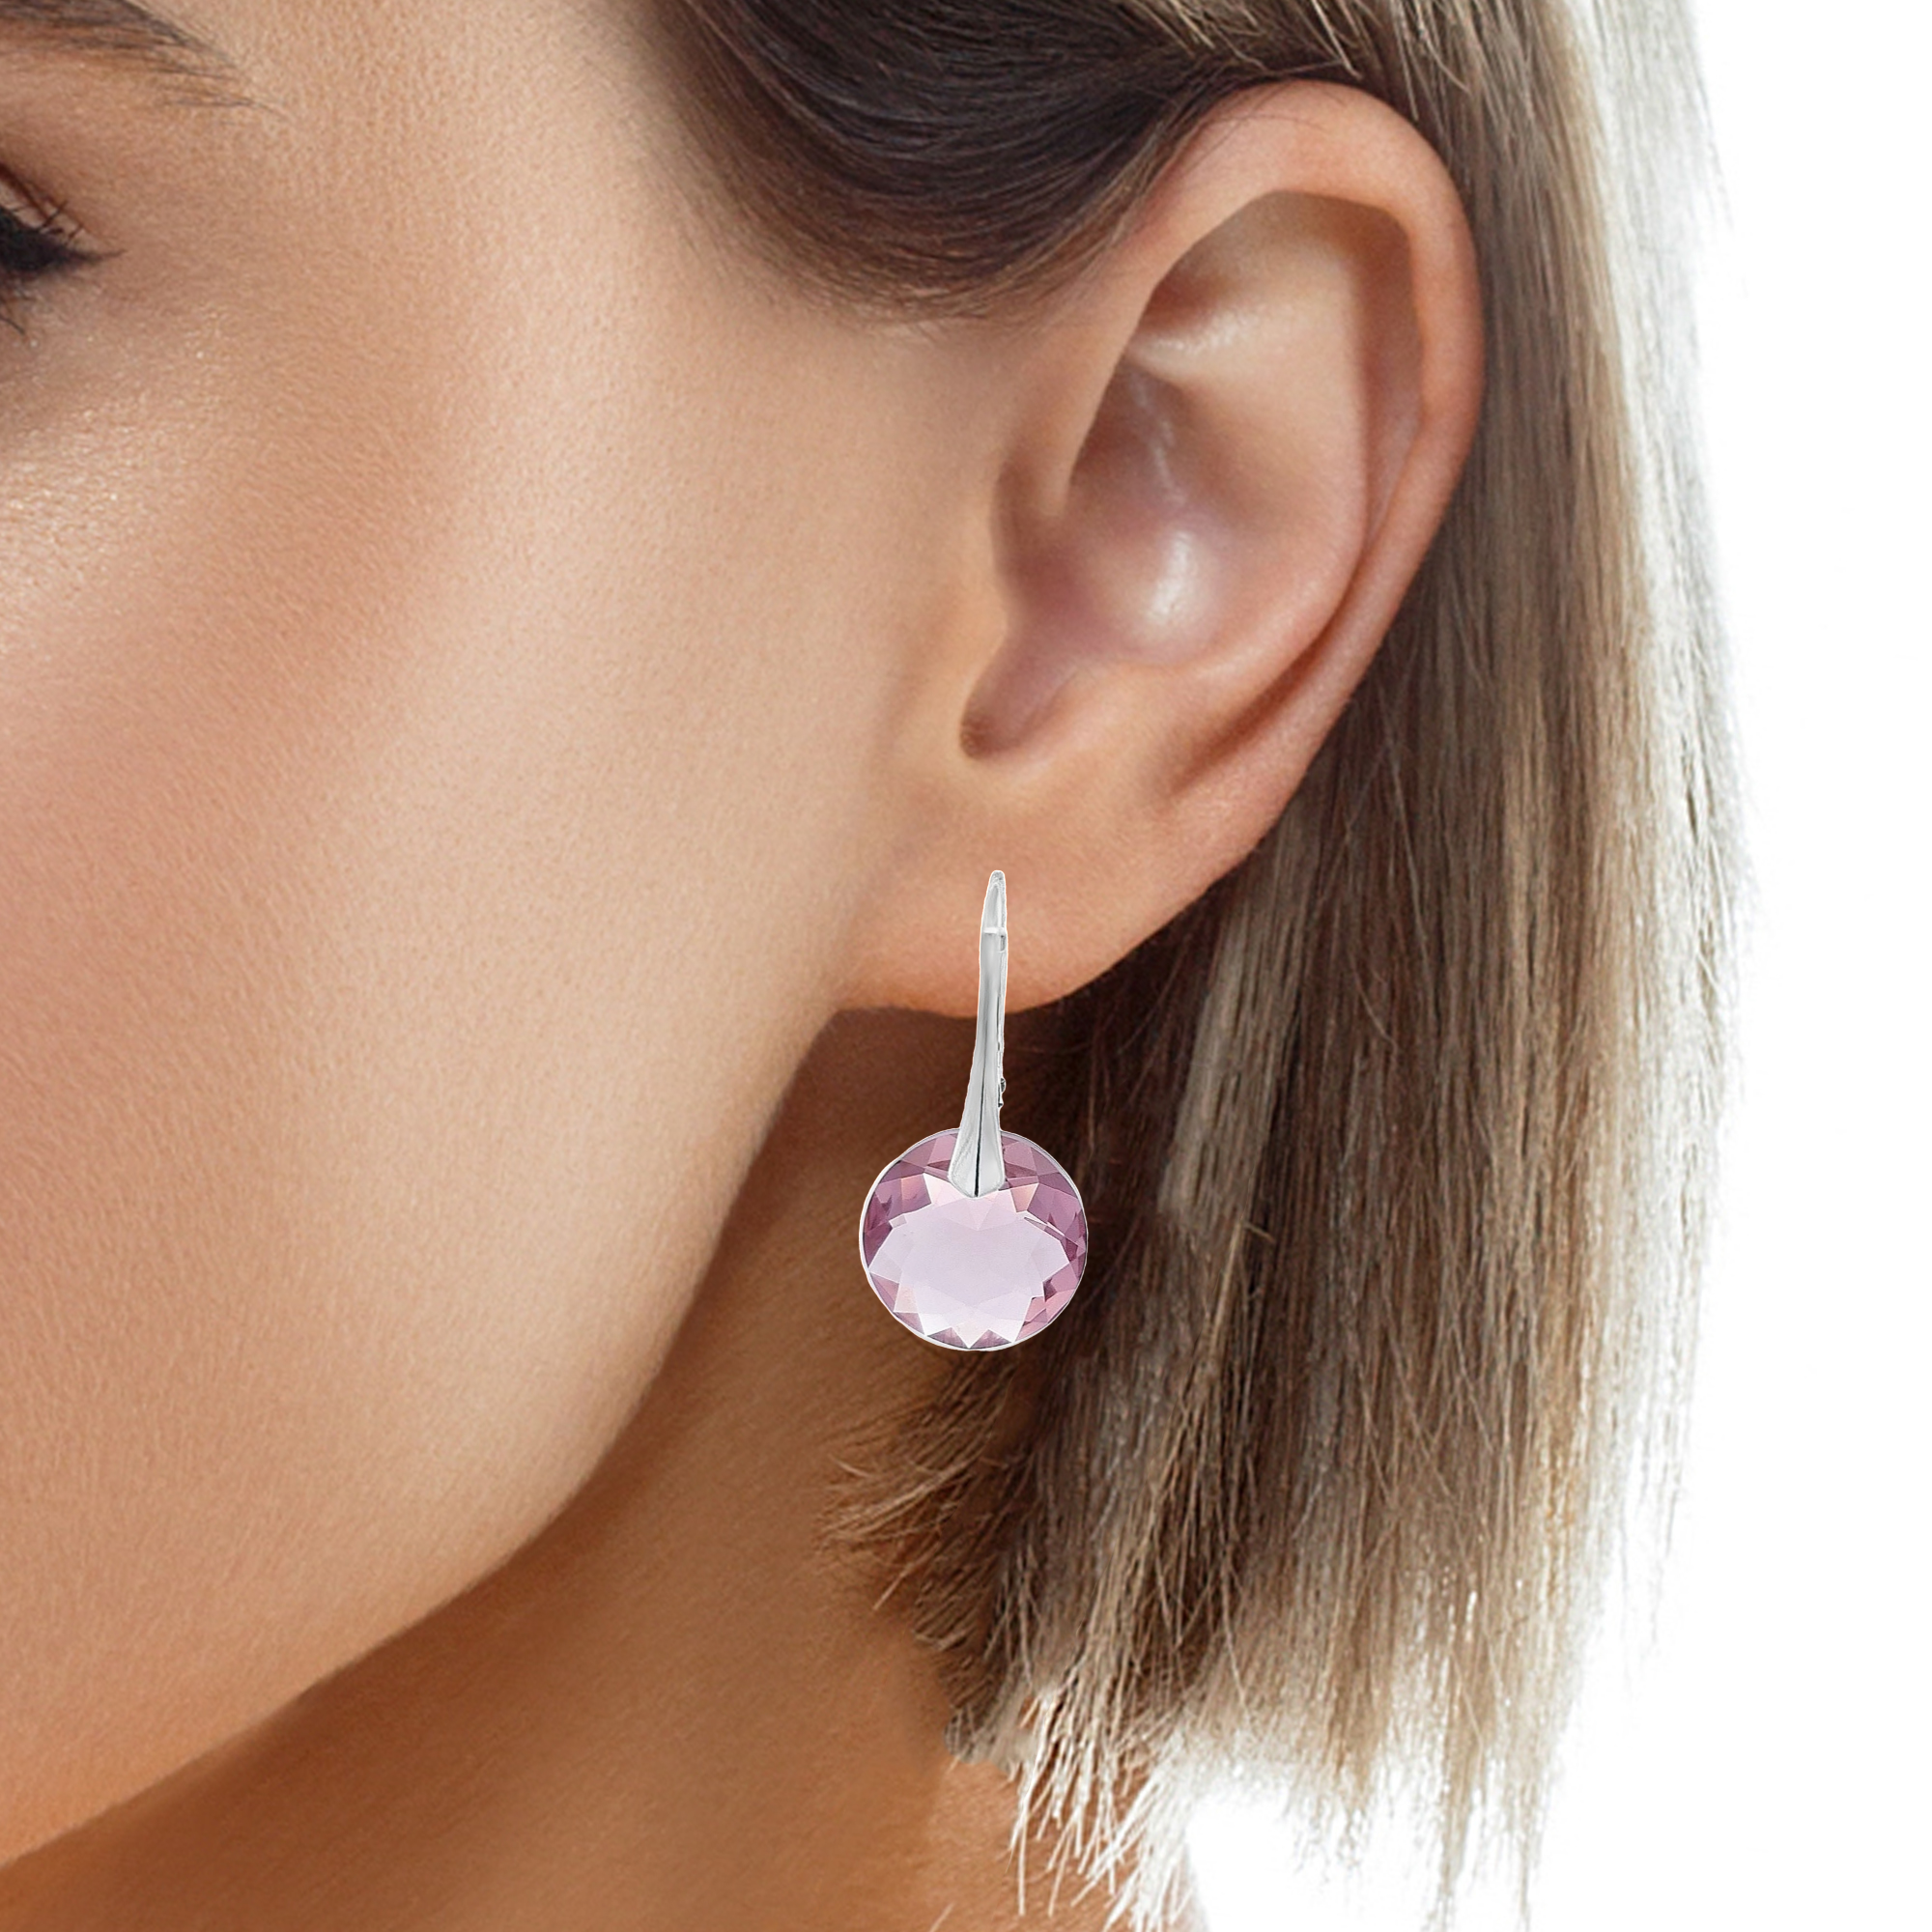 Model wearing the Birthstone Silver Leverback Earrings with Light Amethyst Round Crystals for June Birthstones or Gemini Birthdays.